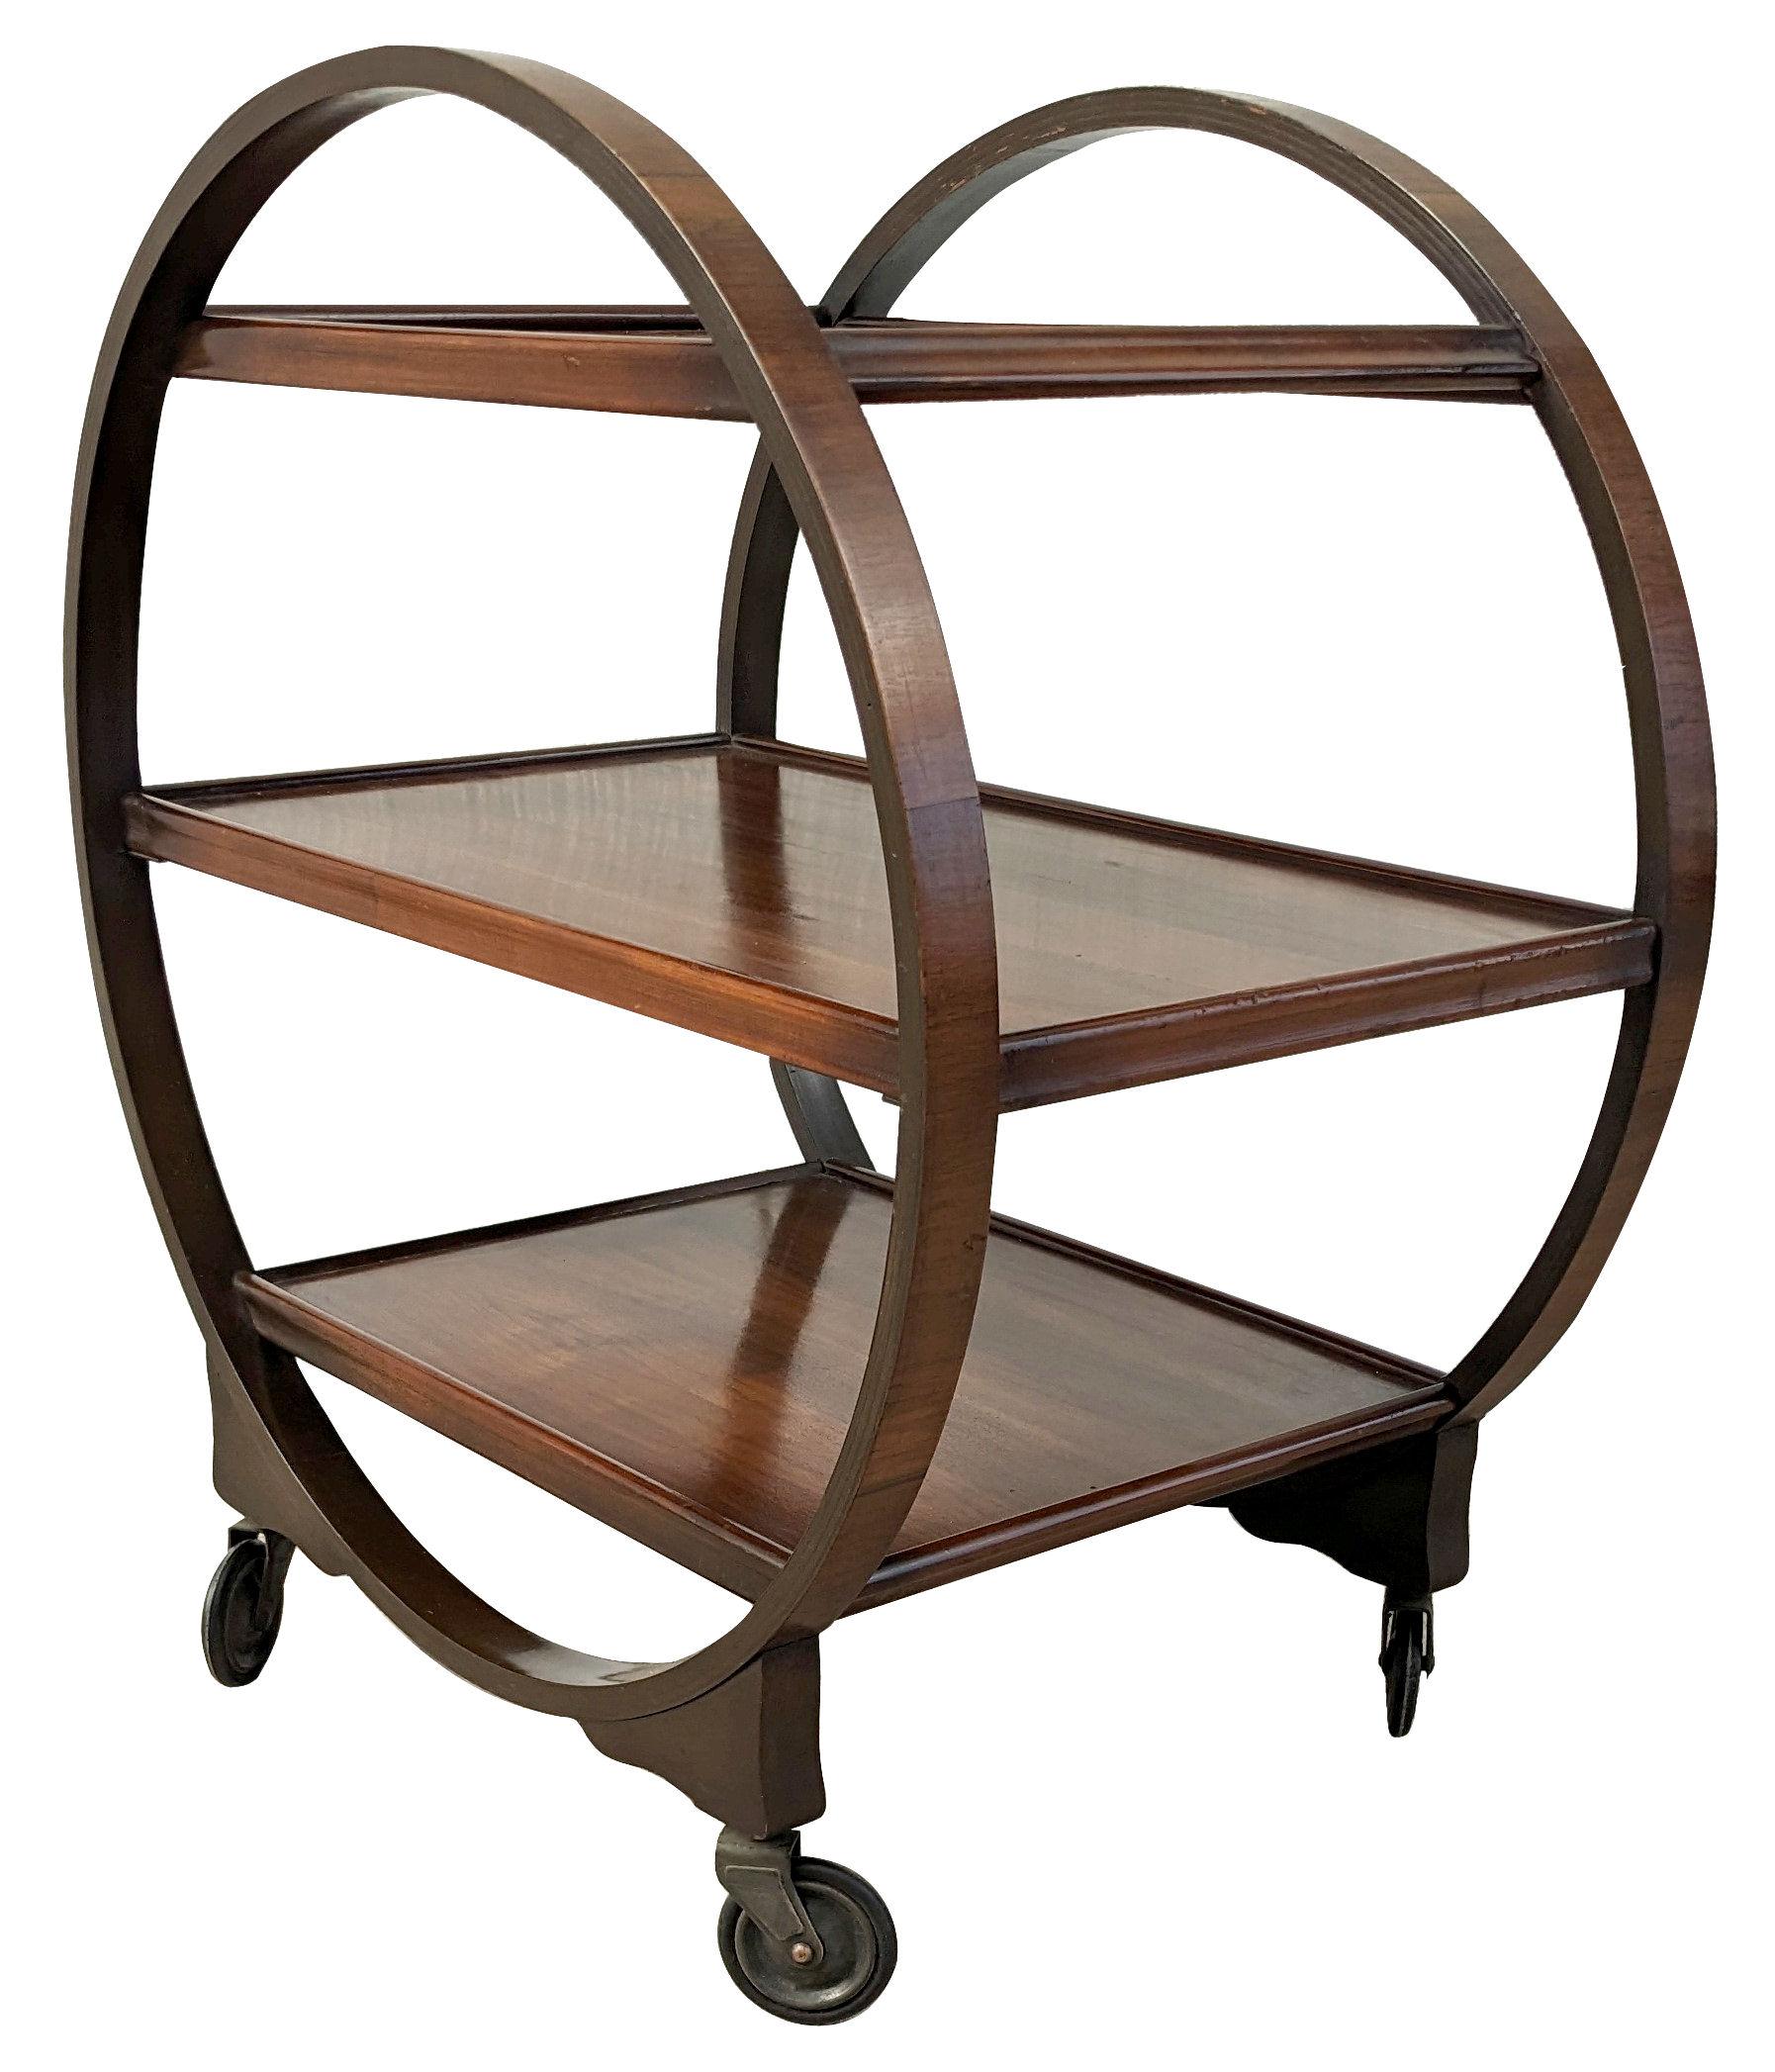 Very attractive and iconic English Art Deco Savoy Hostess trolley cart dating from the 1920s-1930s period. This three-tiered trolley not only looks impressive but is very functional too. Solid walnut in a warm mid-tone coloring on it's original